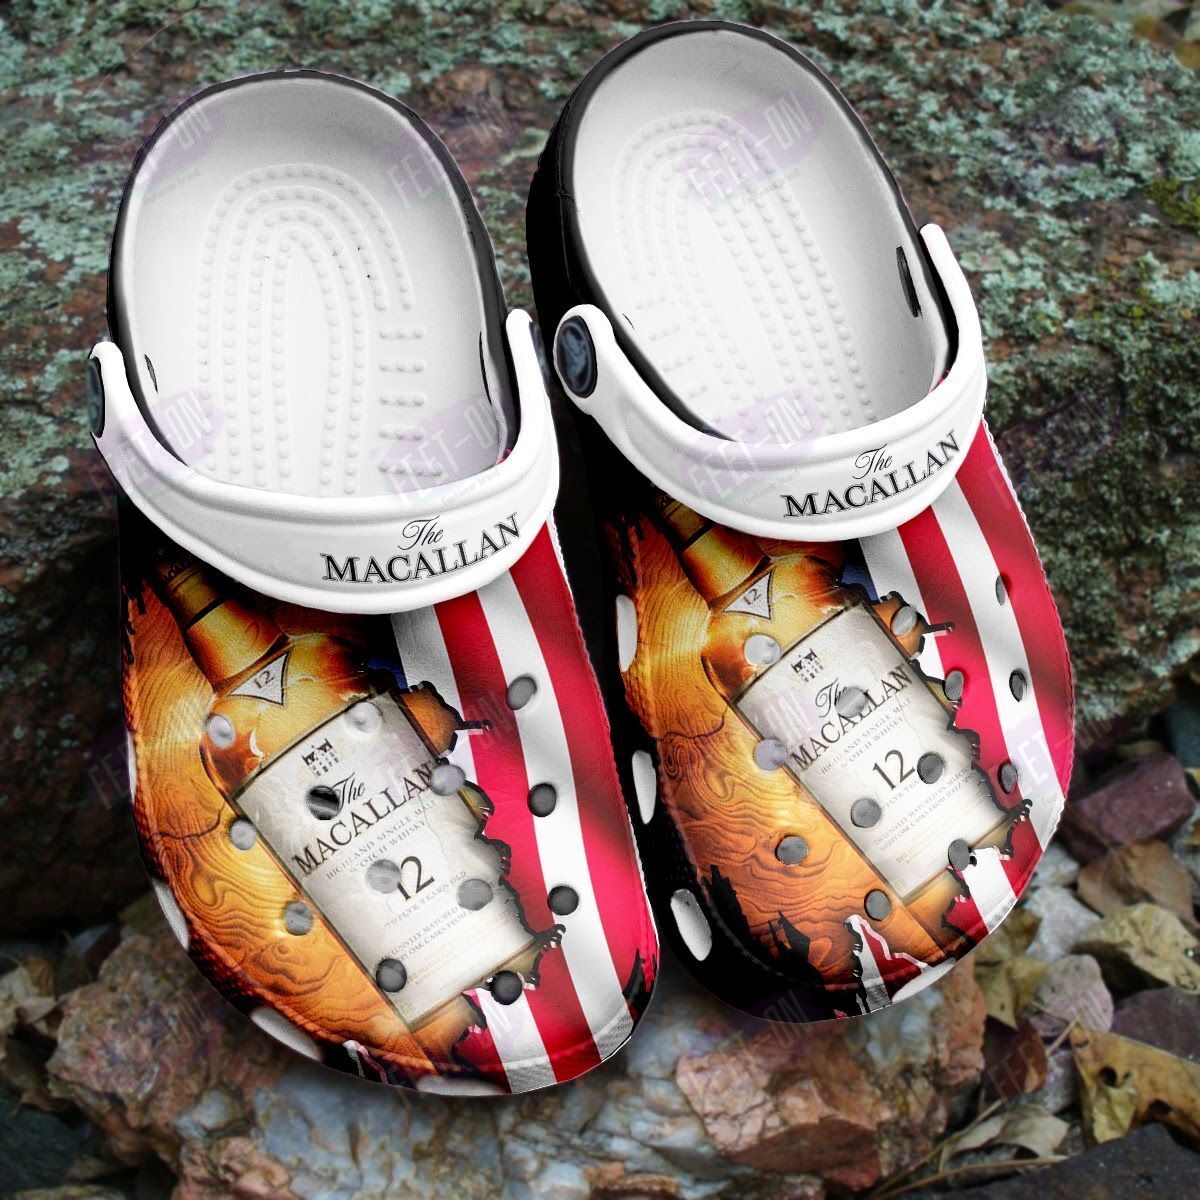 BEST The Macallan Double Cask 12 Years Whisky crocs crocband Shoes